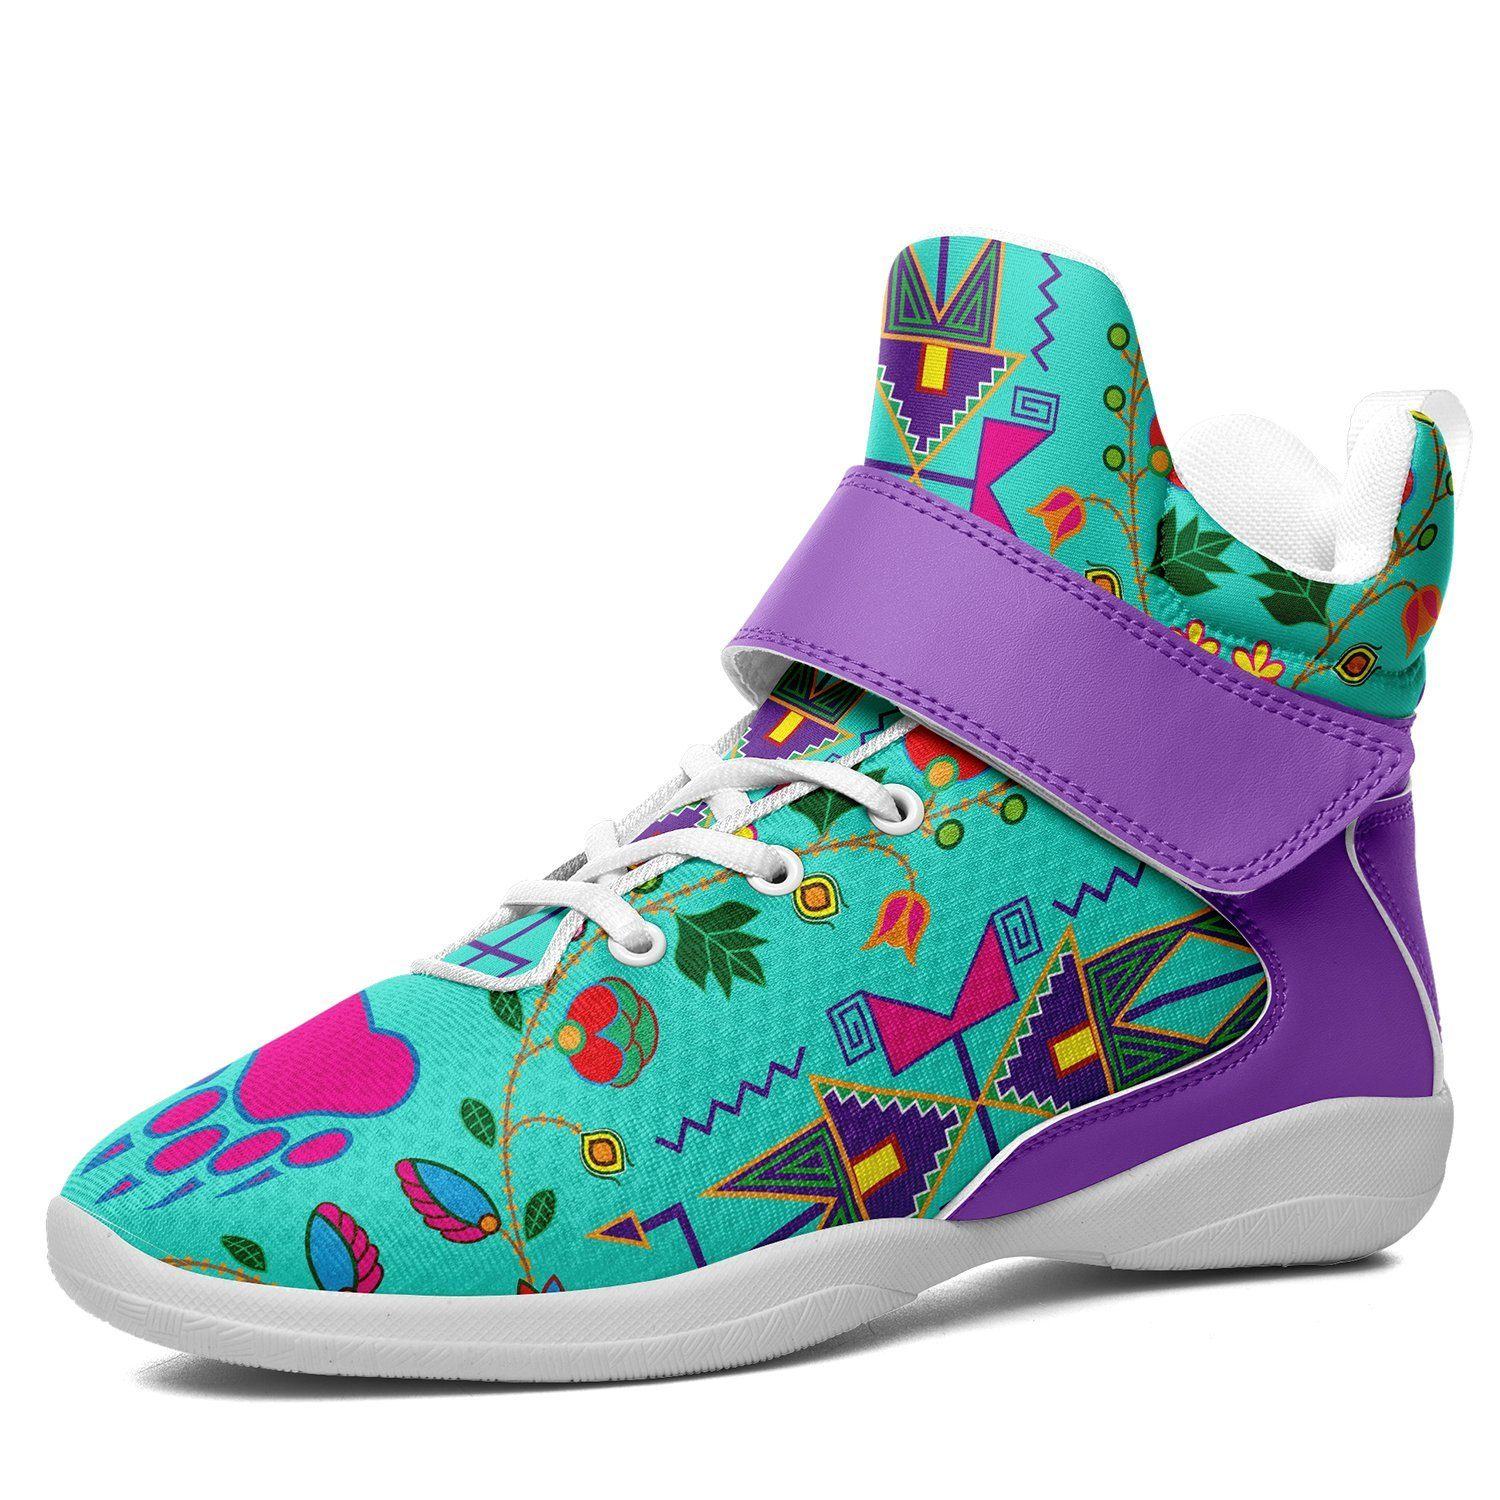 Geometric Floral Fall Sky Kid's Ipottaa Basketball / Sport High Top Shoes 49 Dzine US Women 4.5 / US Youth 3.5 / EUR 35 White Sole with Lavender Strap 